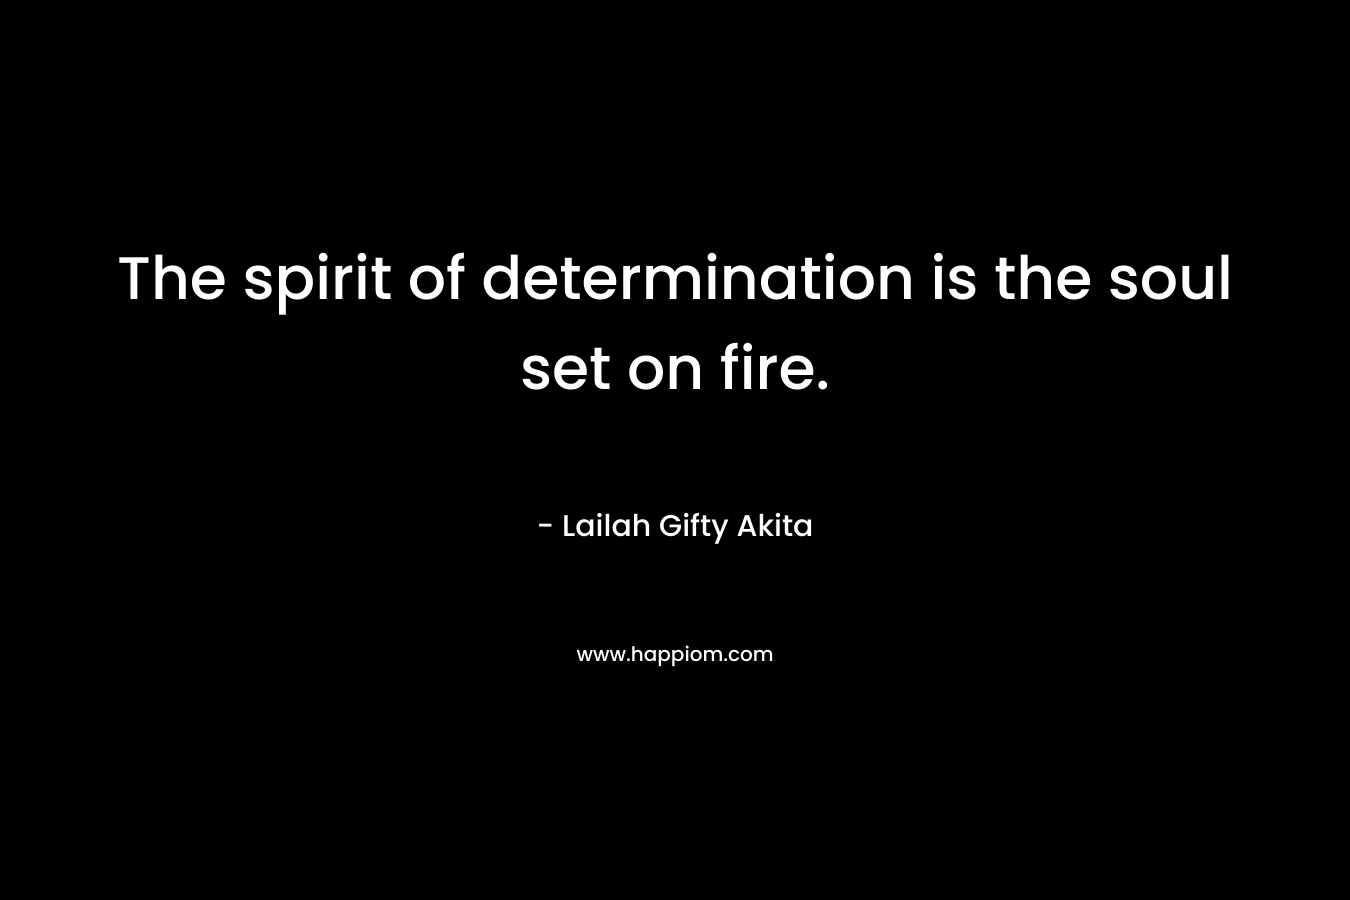 The spirit of determination is the soul set on fire.